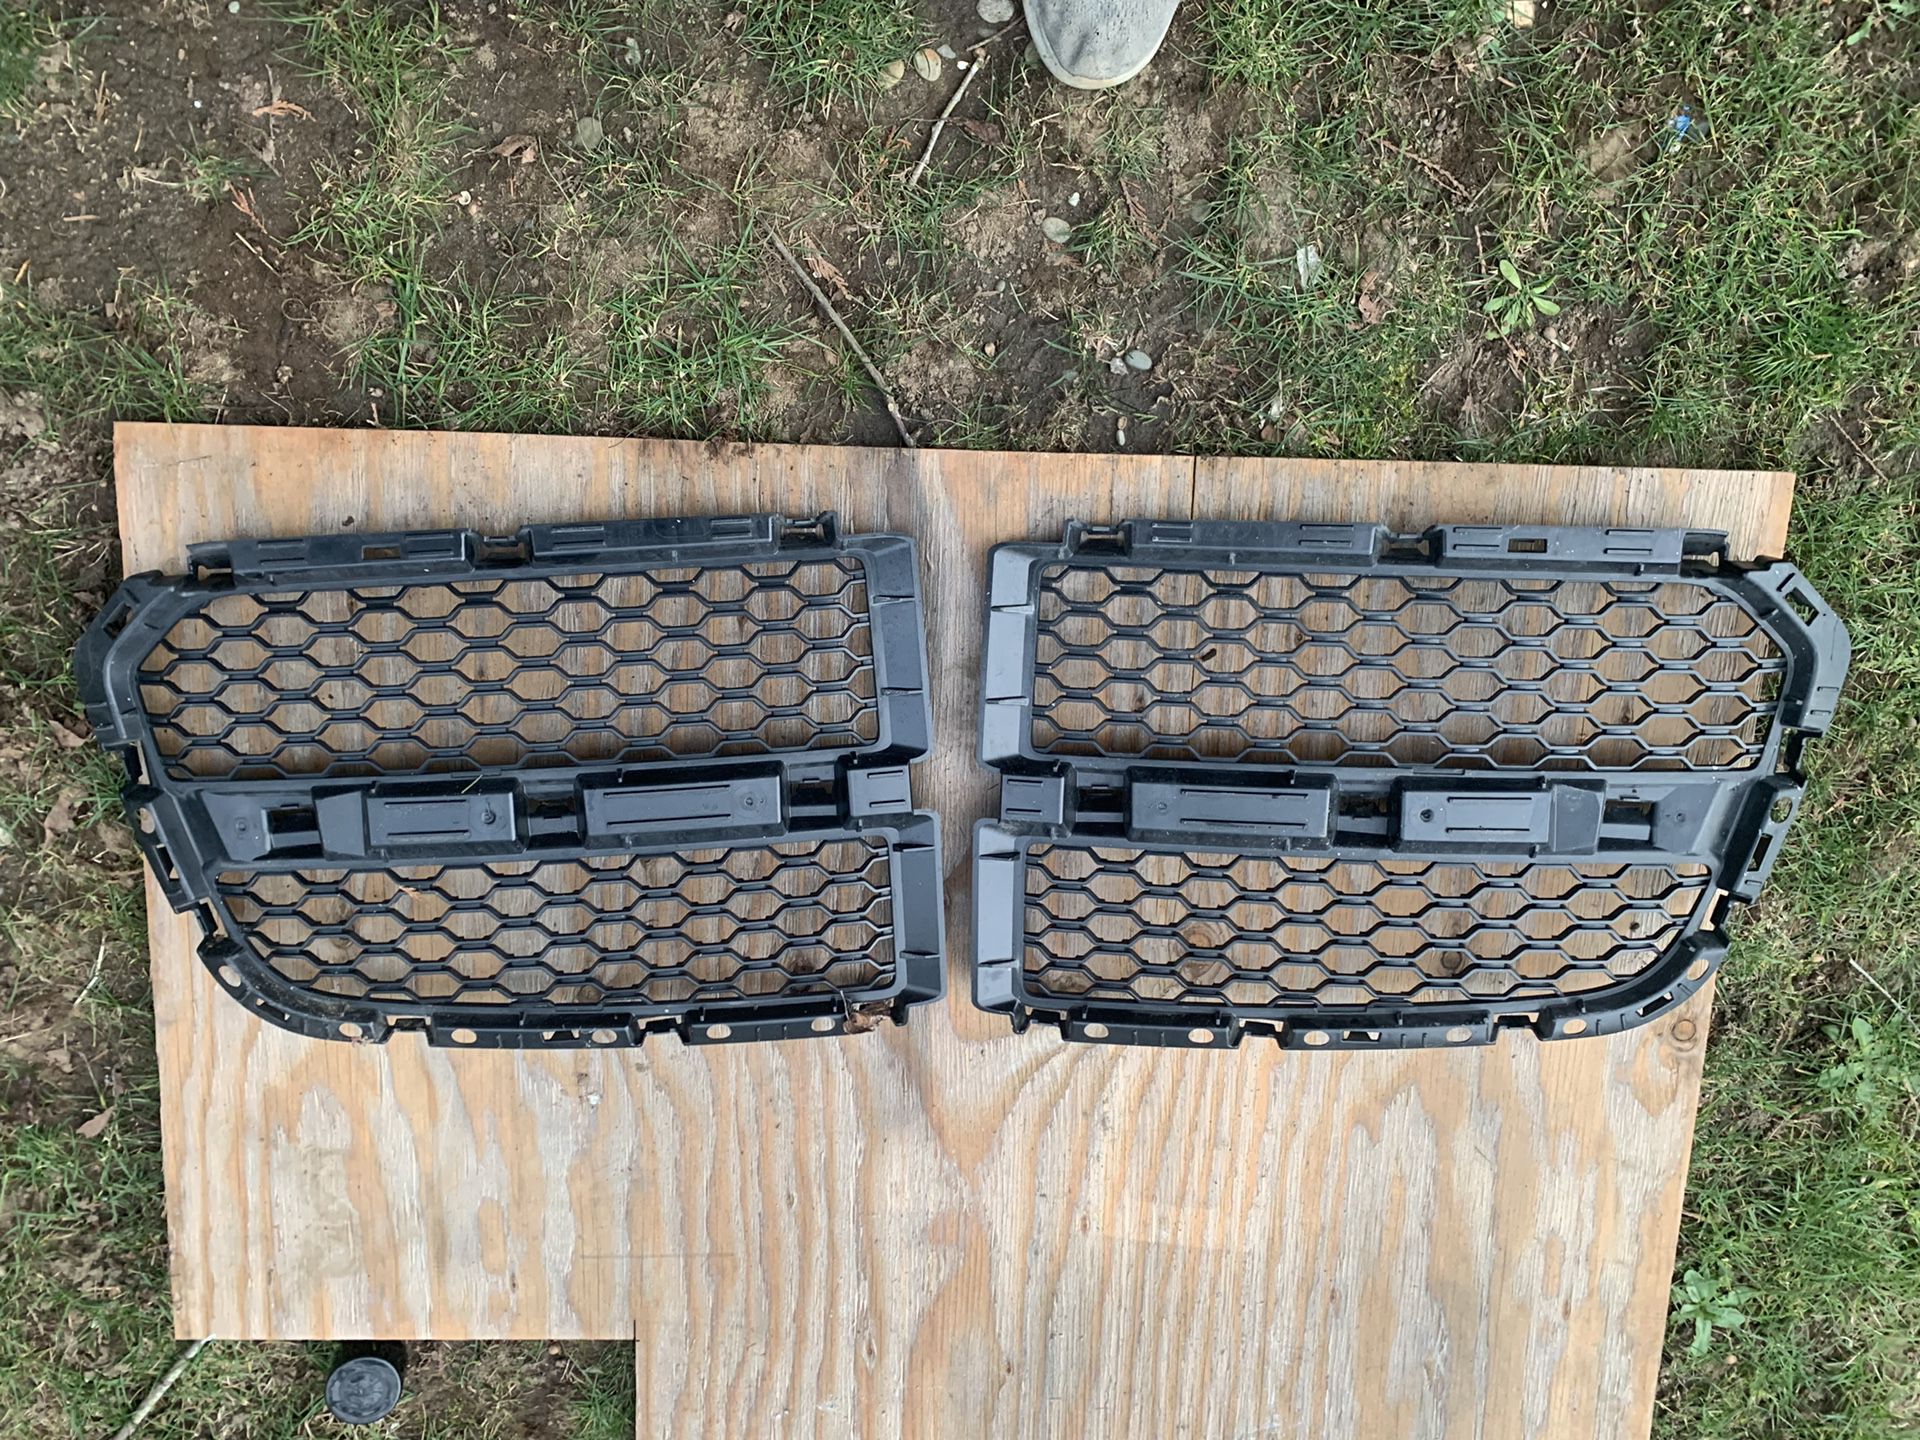 16 ram 1500 grille inserts